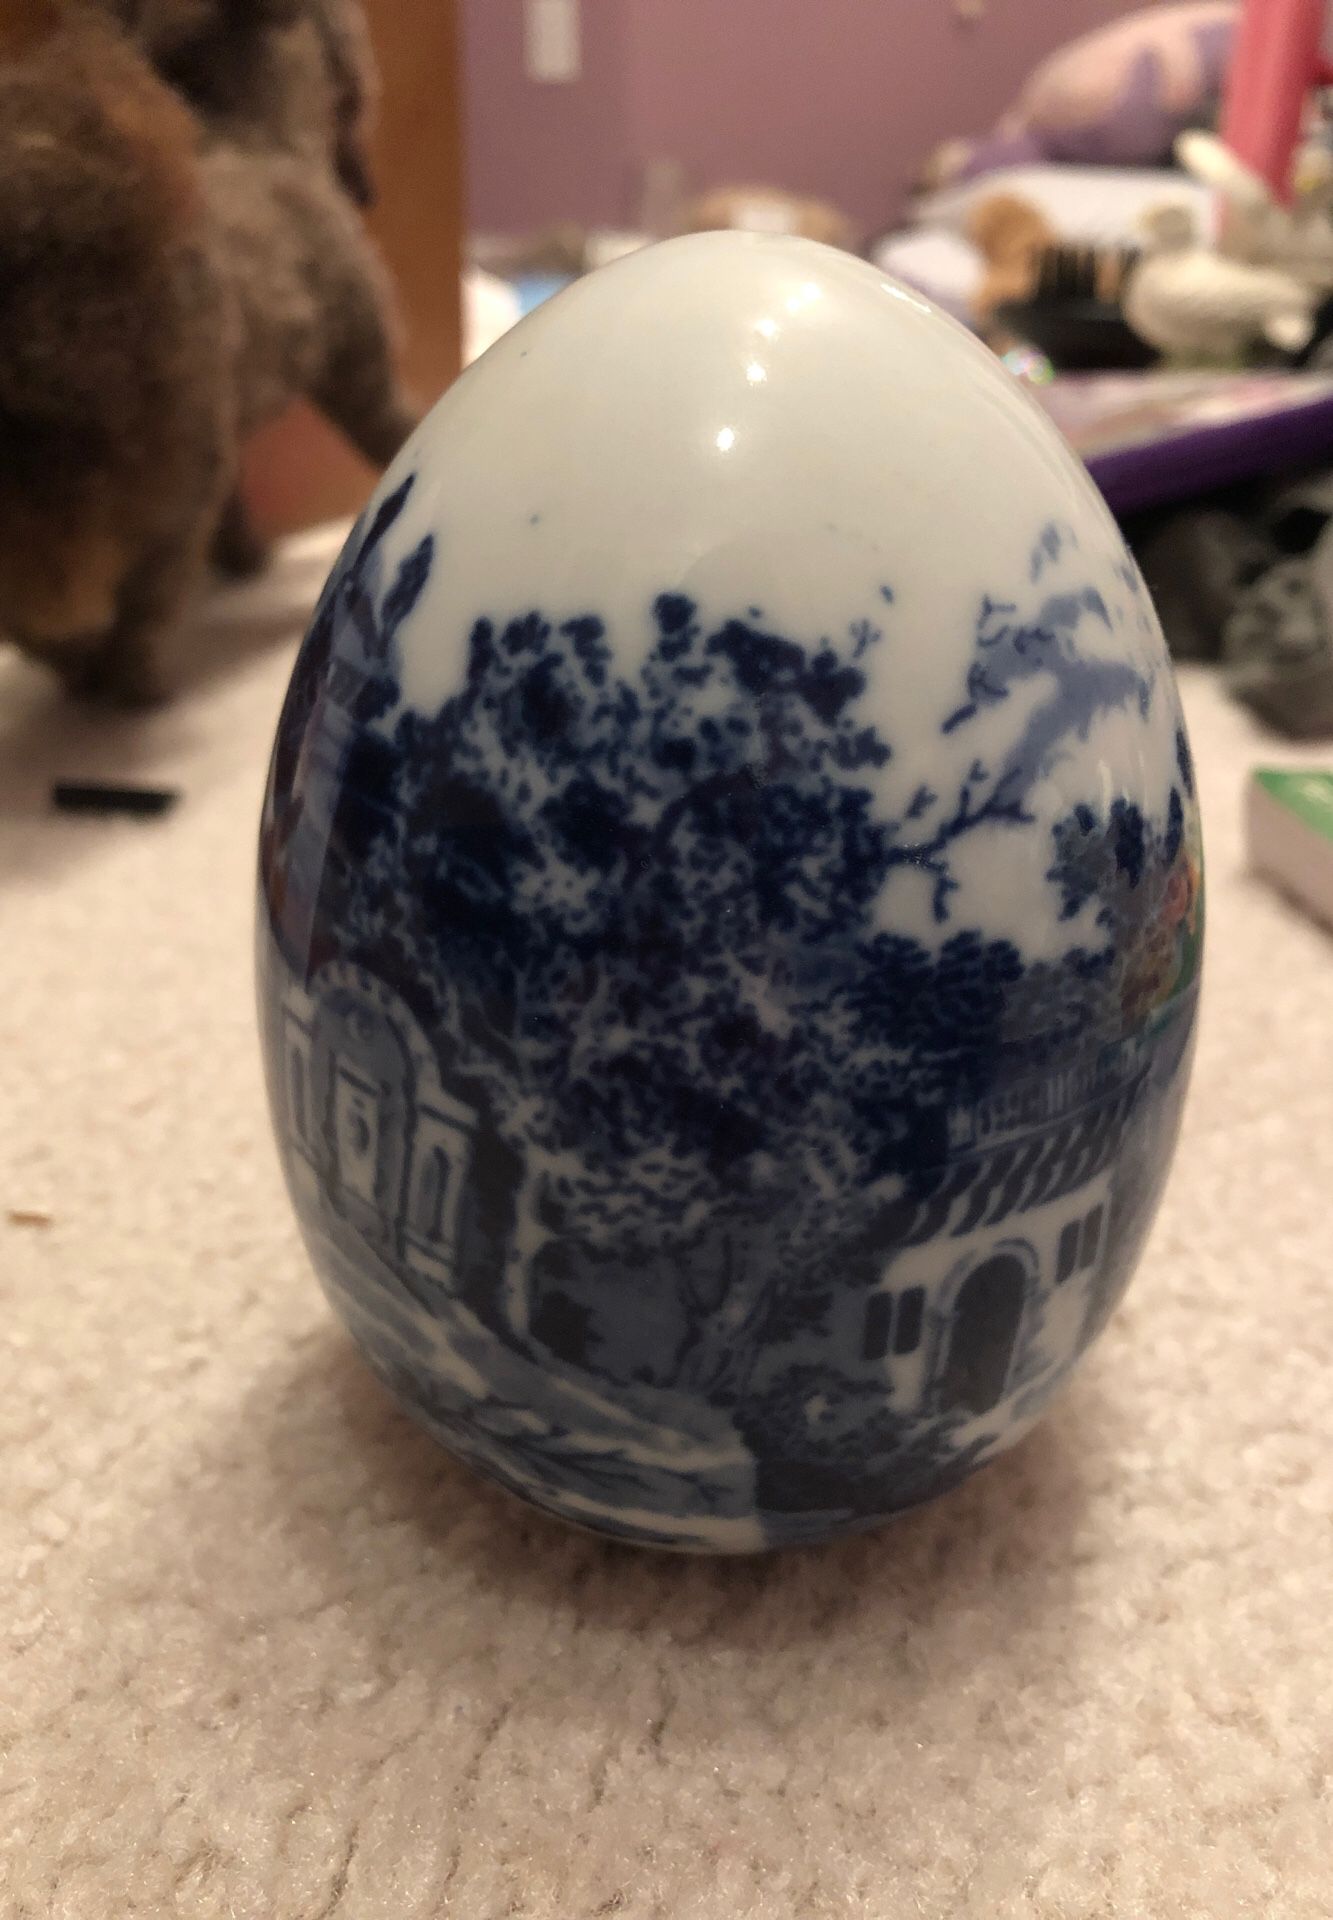 Real China egg worth 1000 asking for 200$